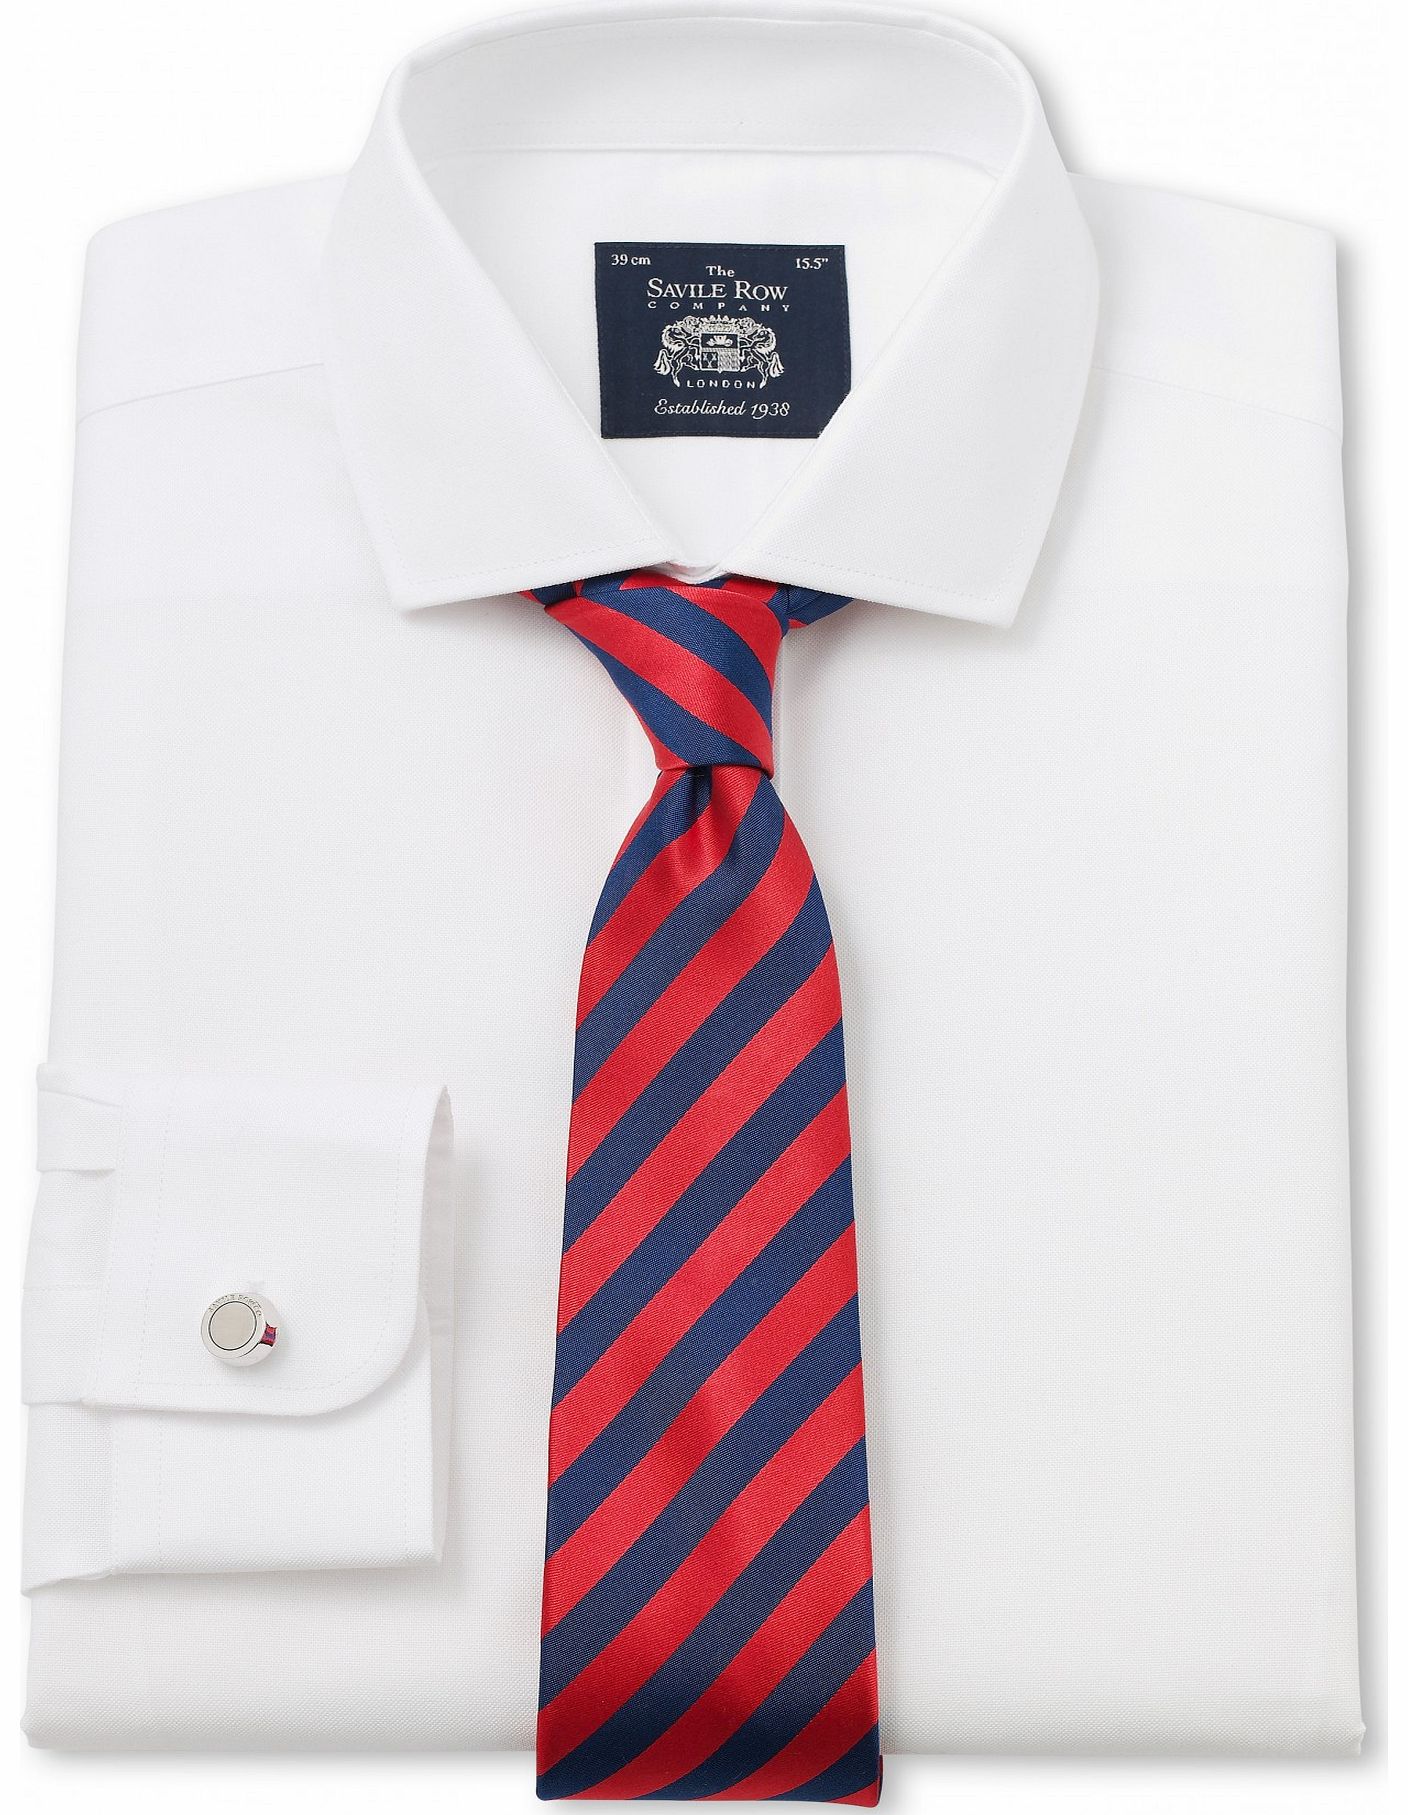 Savile Row Company White Pinpoint Extra Slim Fit Shirt 16`` Double